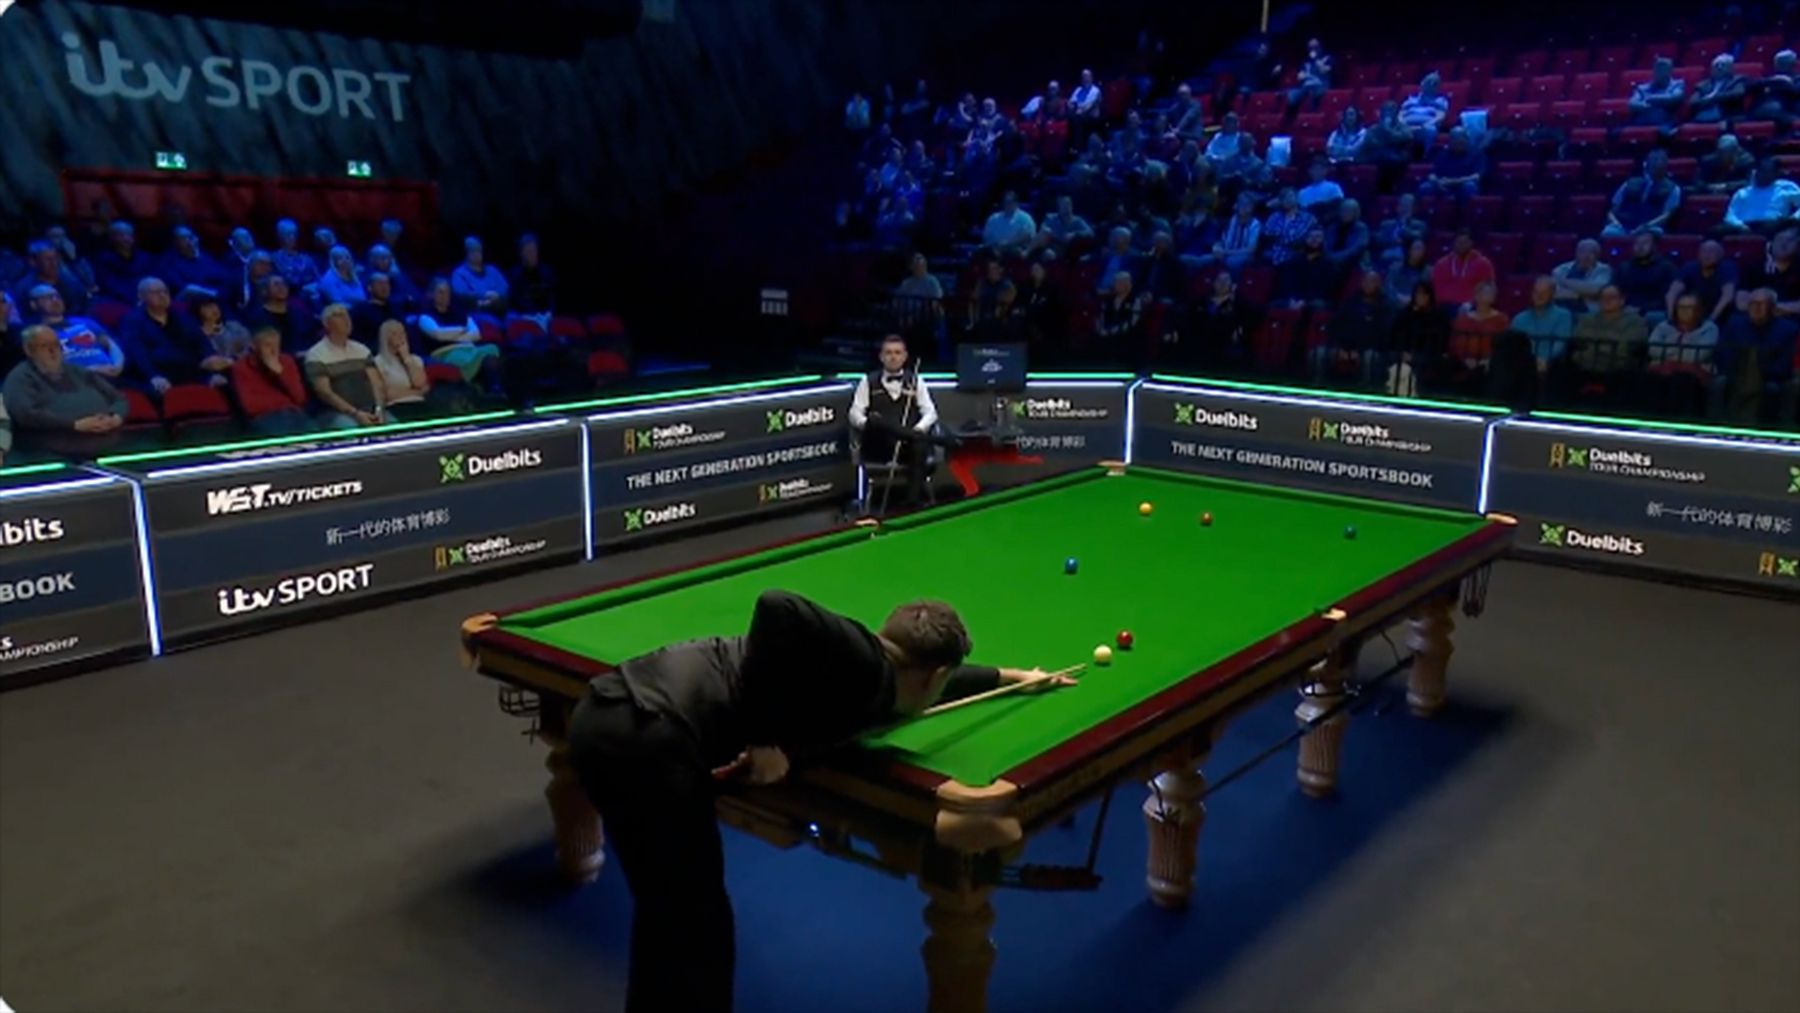 Snooker Watch Ryan Days incredible finish to the first 147 break in Tour Championship history